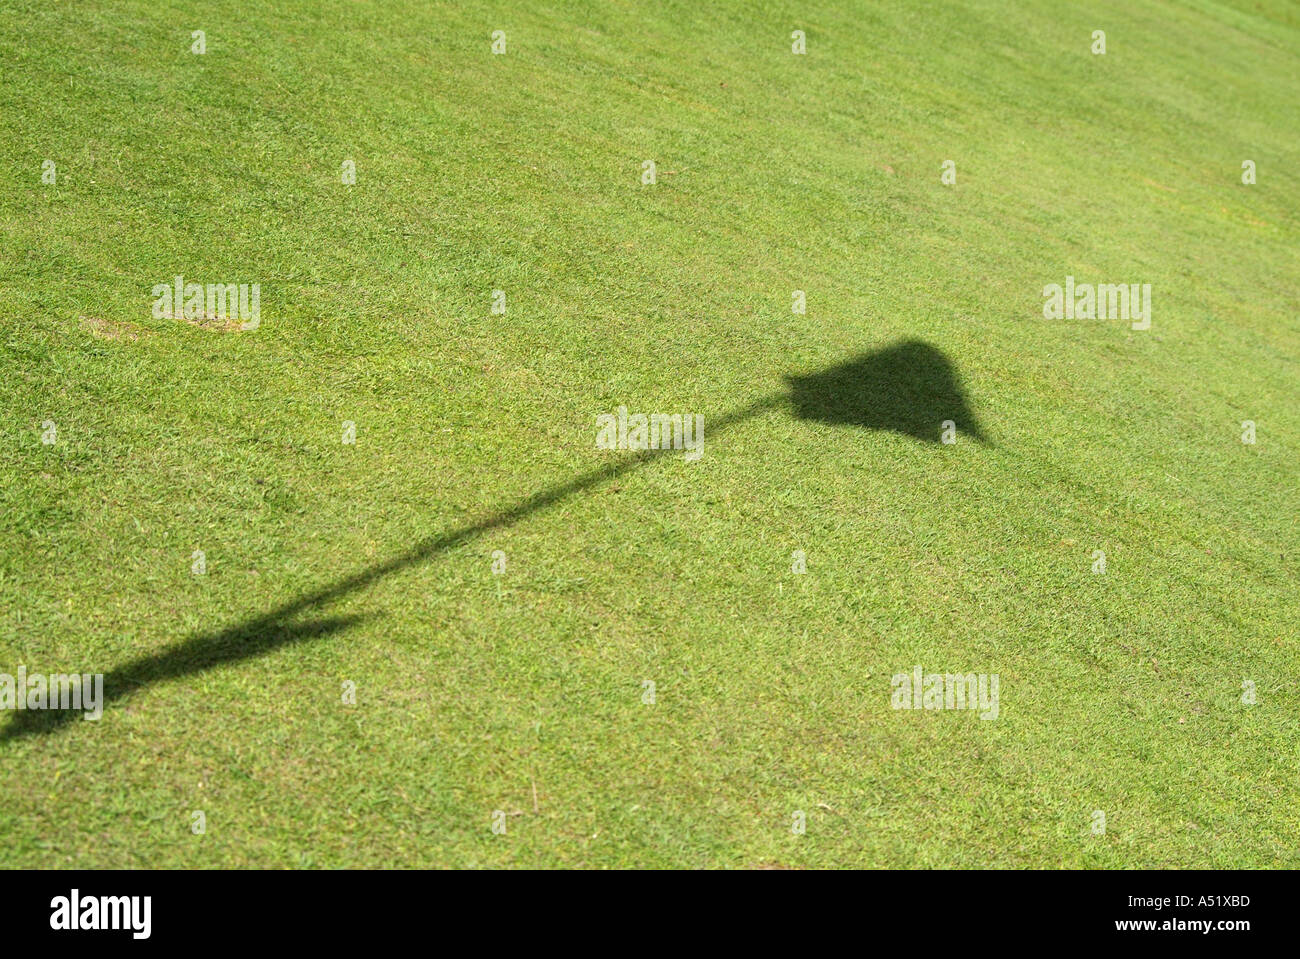 Shadow of a golf tee and flag on the green grass. England Stock Photo